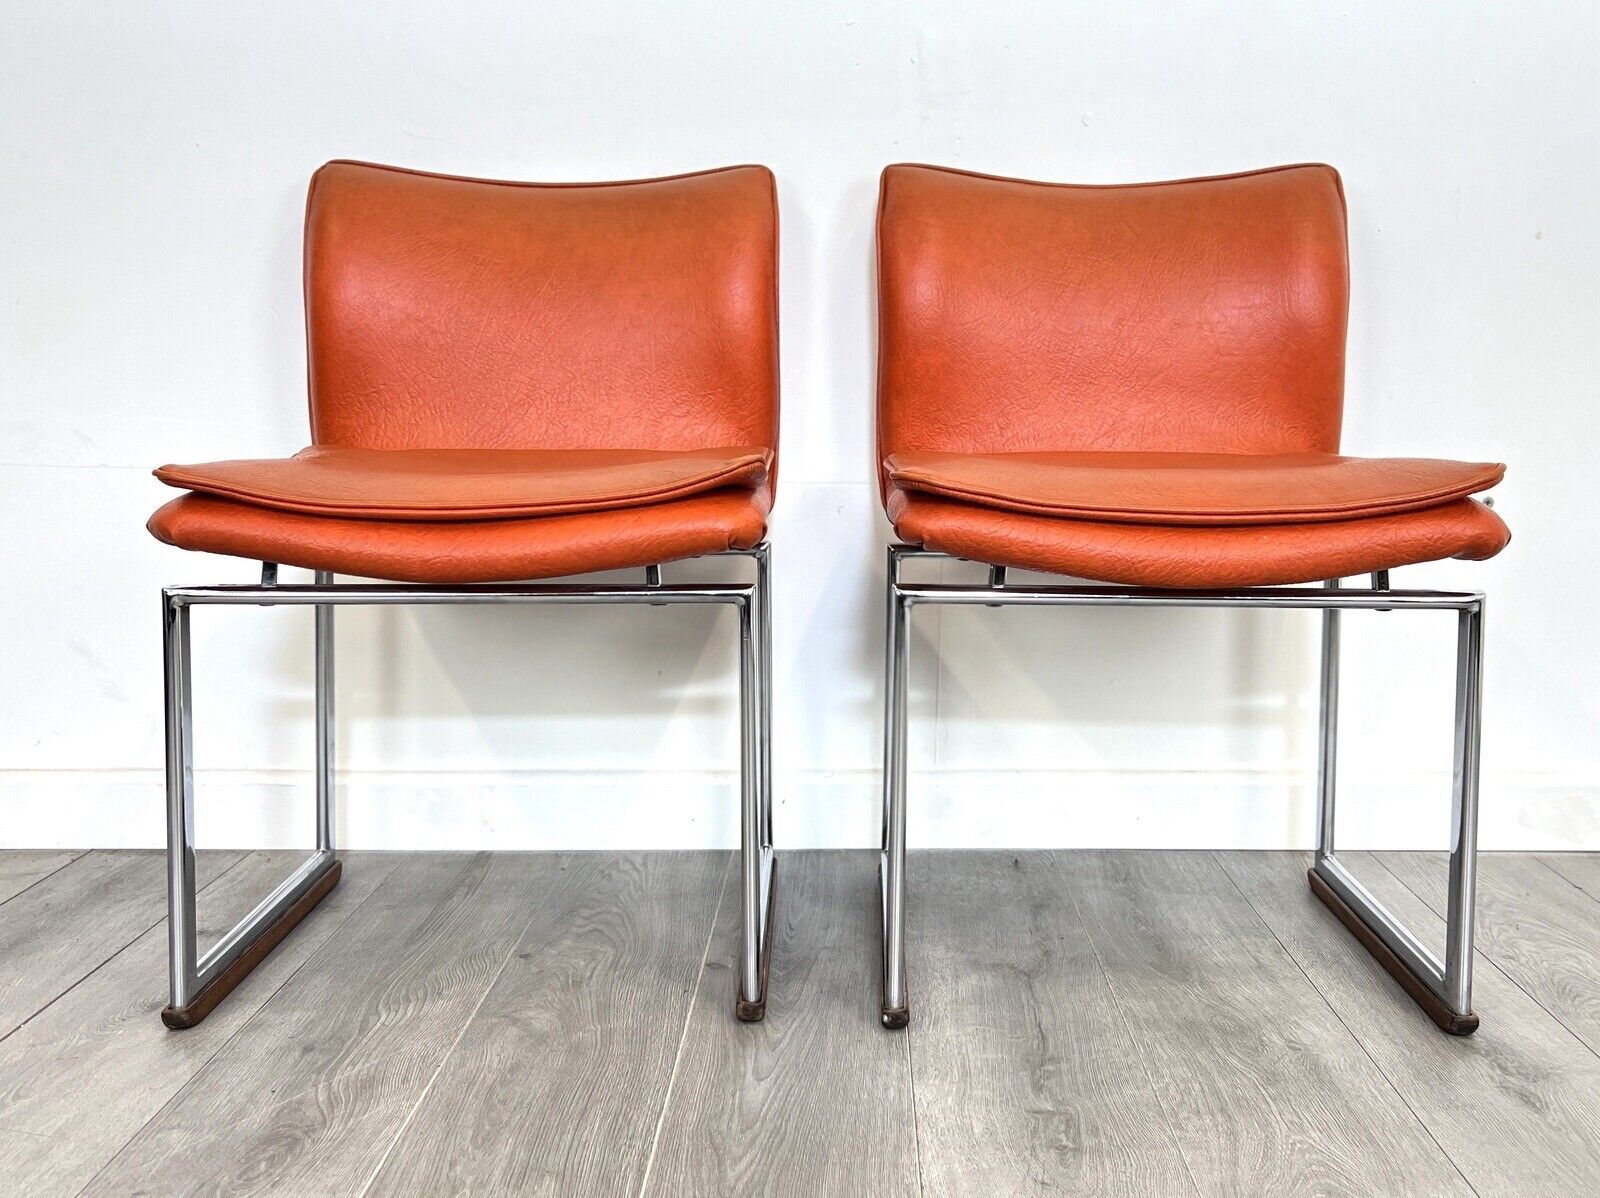 Pieff Epee, Pair of Chrome and Orange Leather Dining Chairs